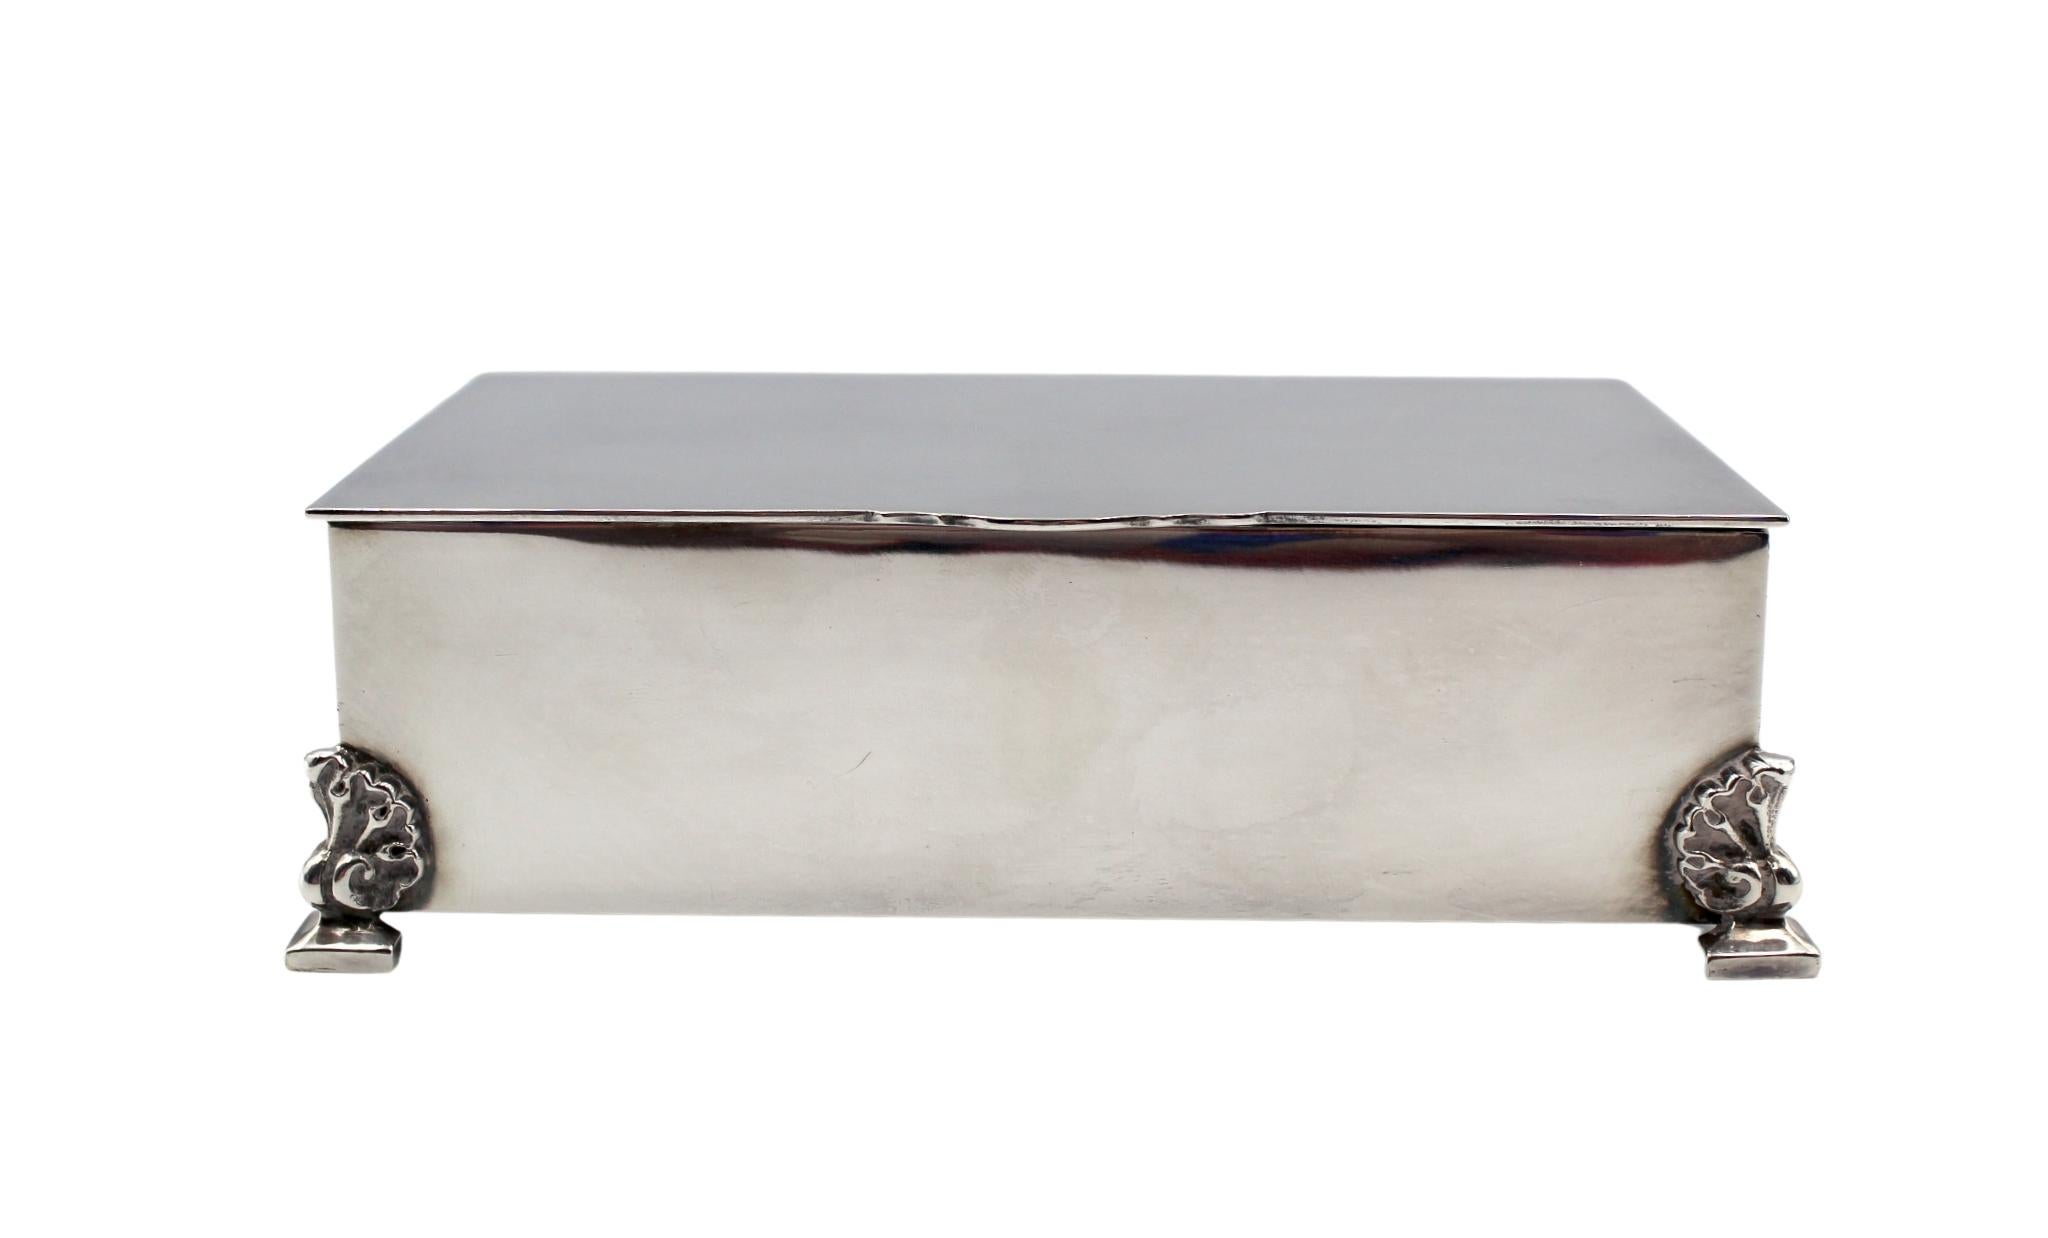 Offered is a silver plated keepsake box, dating to the early 1900s. The hallmarked box offers great storage solution for jewelry, cufflinks, and other keepsakes, with a divided interior. A well maintained, elegant piece, this antique silver box is